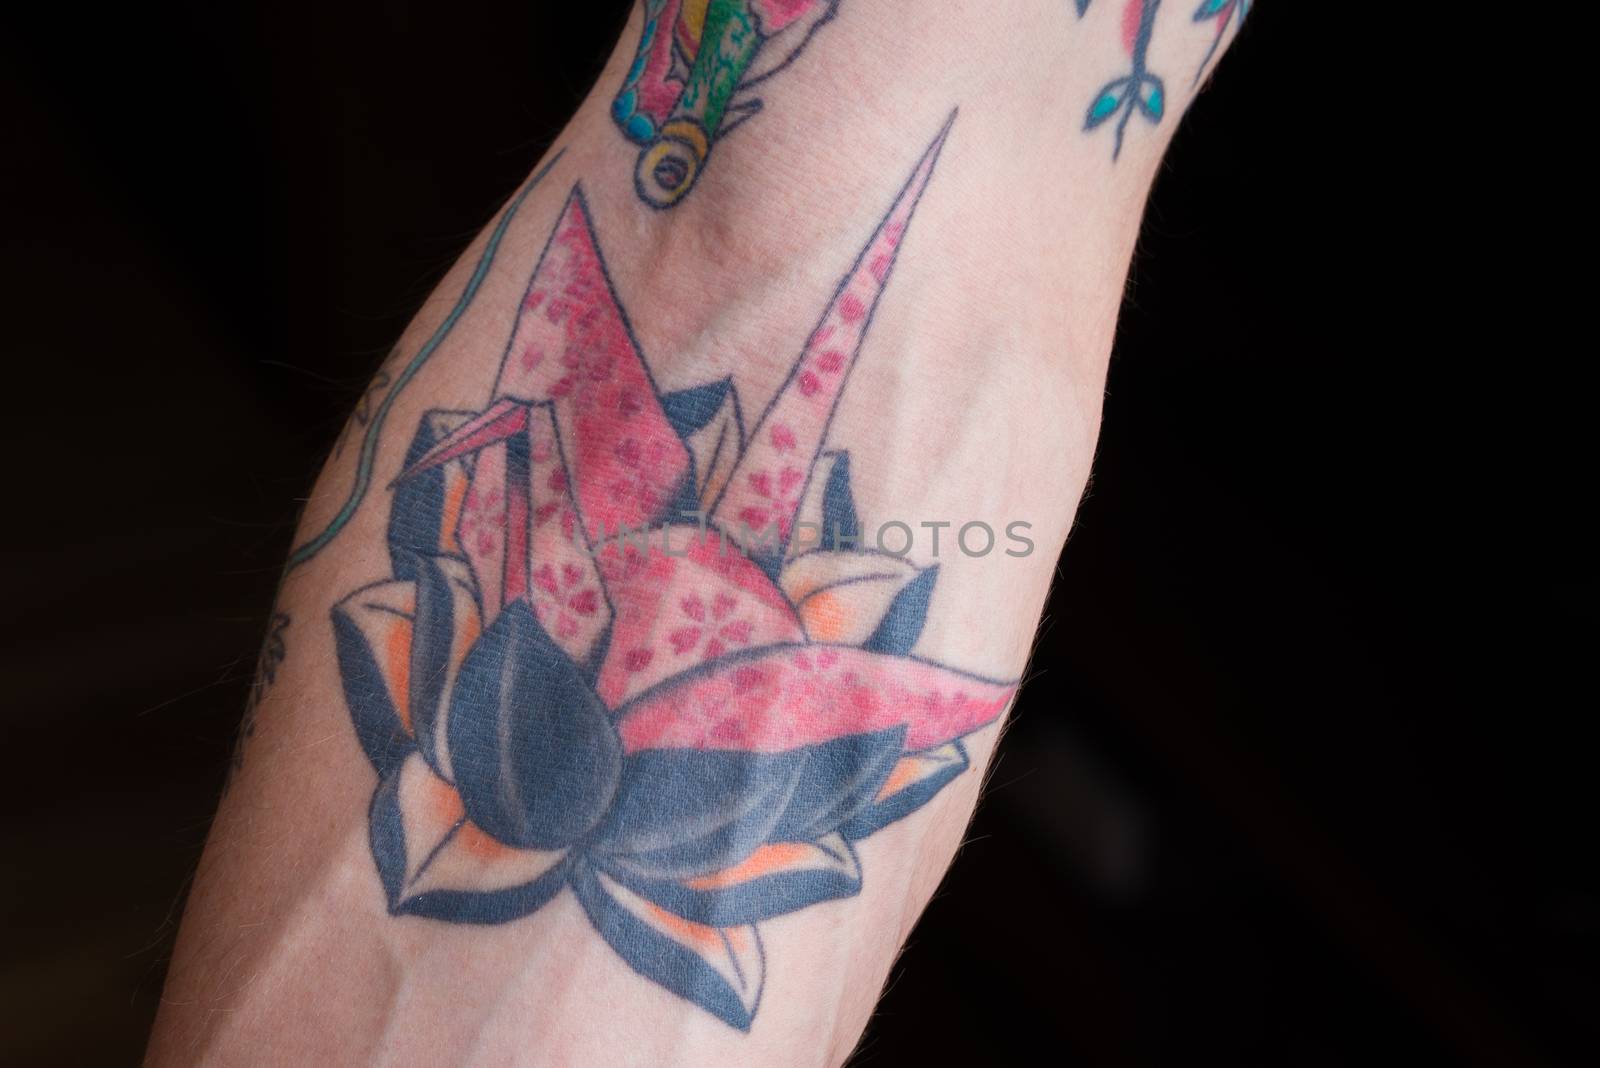 Tattoo of a pink origami crane with cherry blossom petal design on a black and orange lotus.